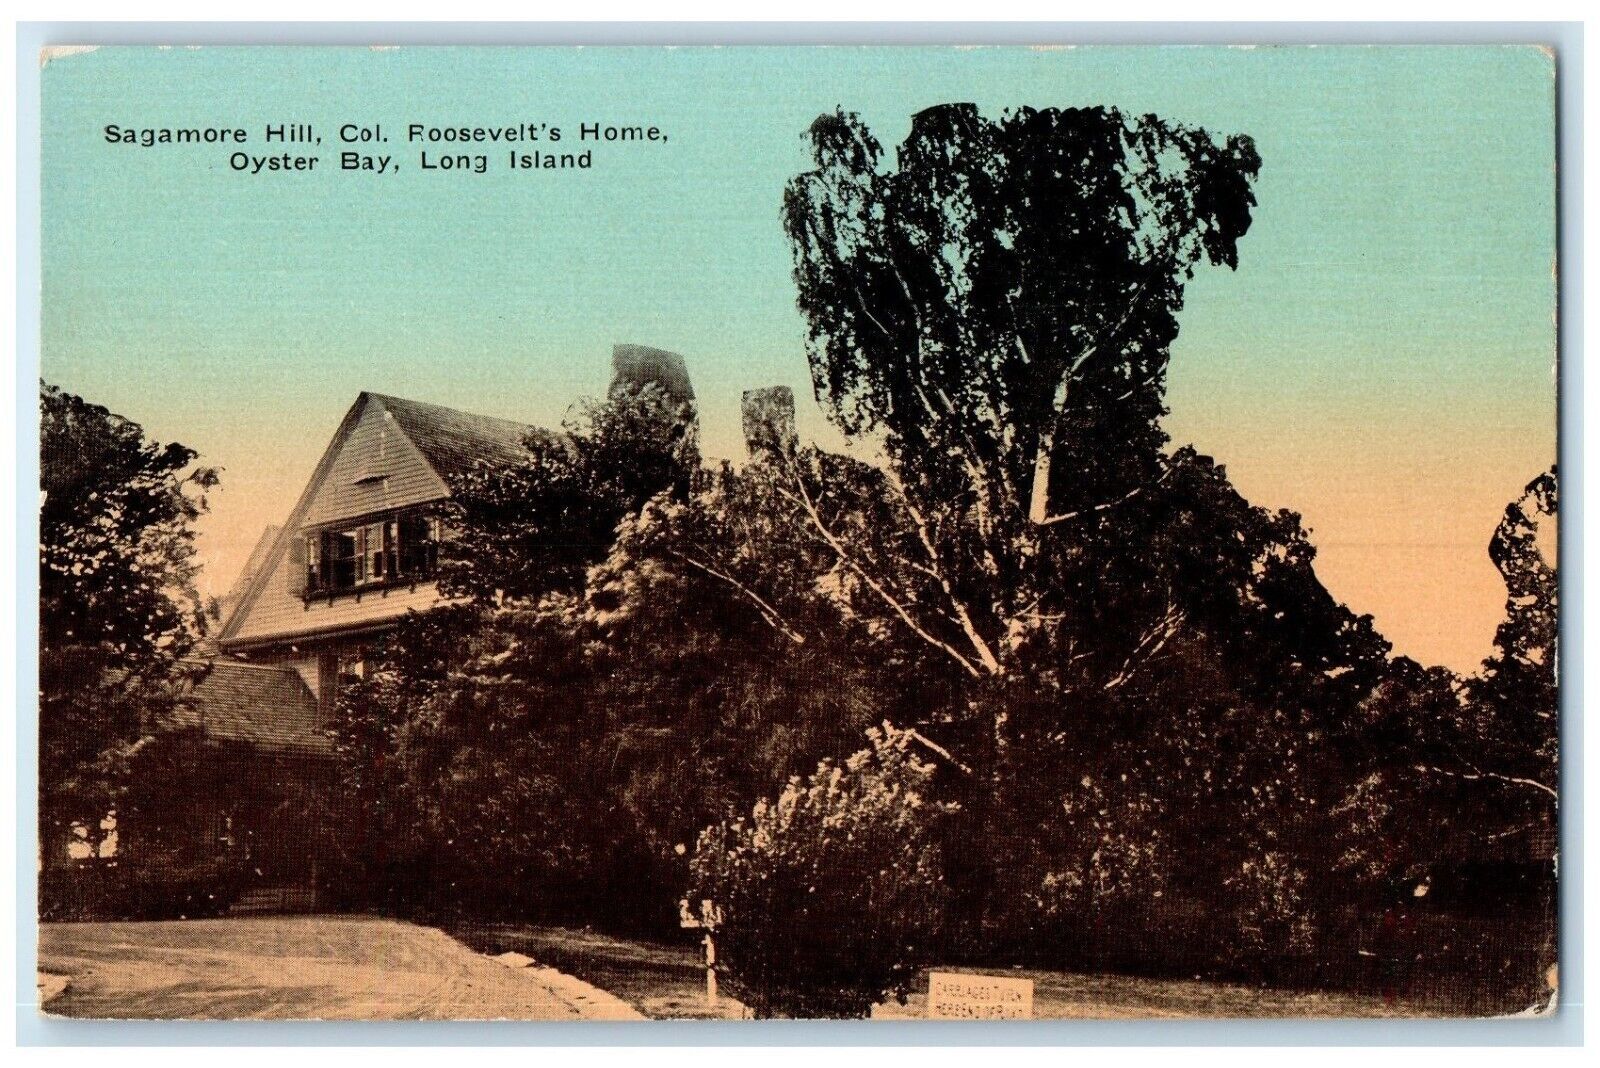 c1910's Sagamore Hill Co. Roosevelt's Home Oyster Bay Long Island NY Postcard